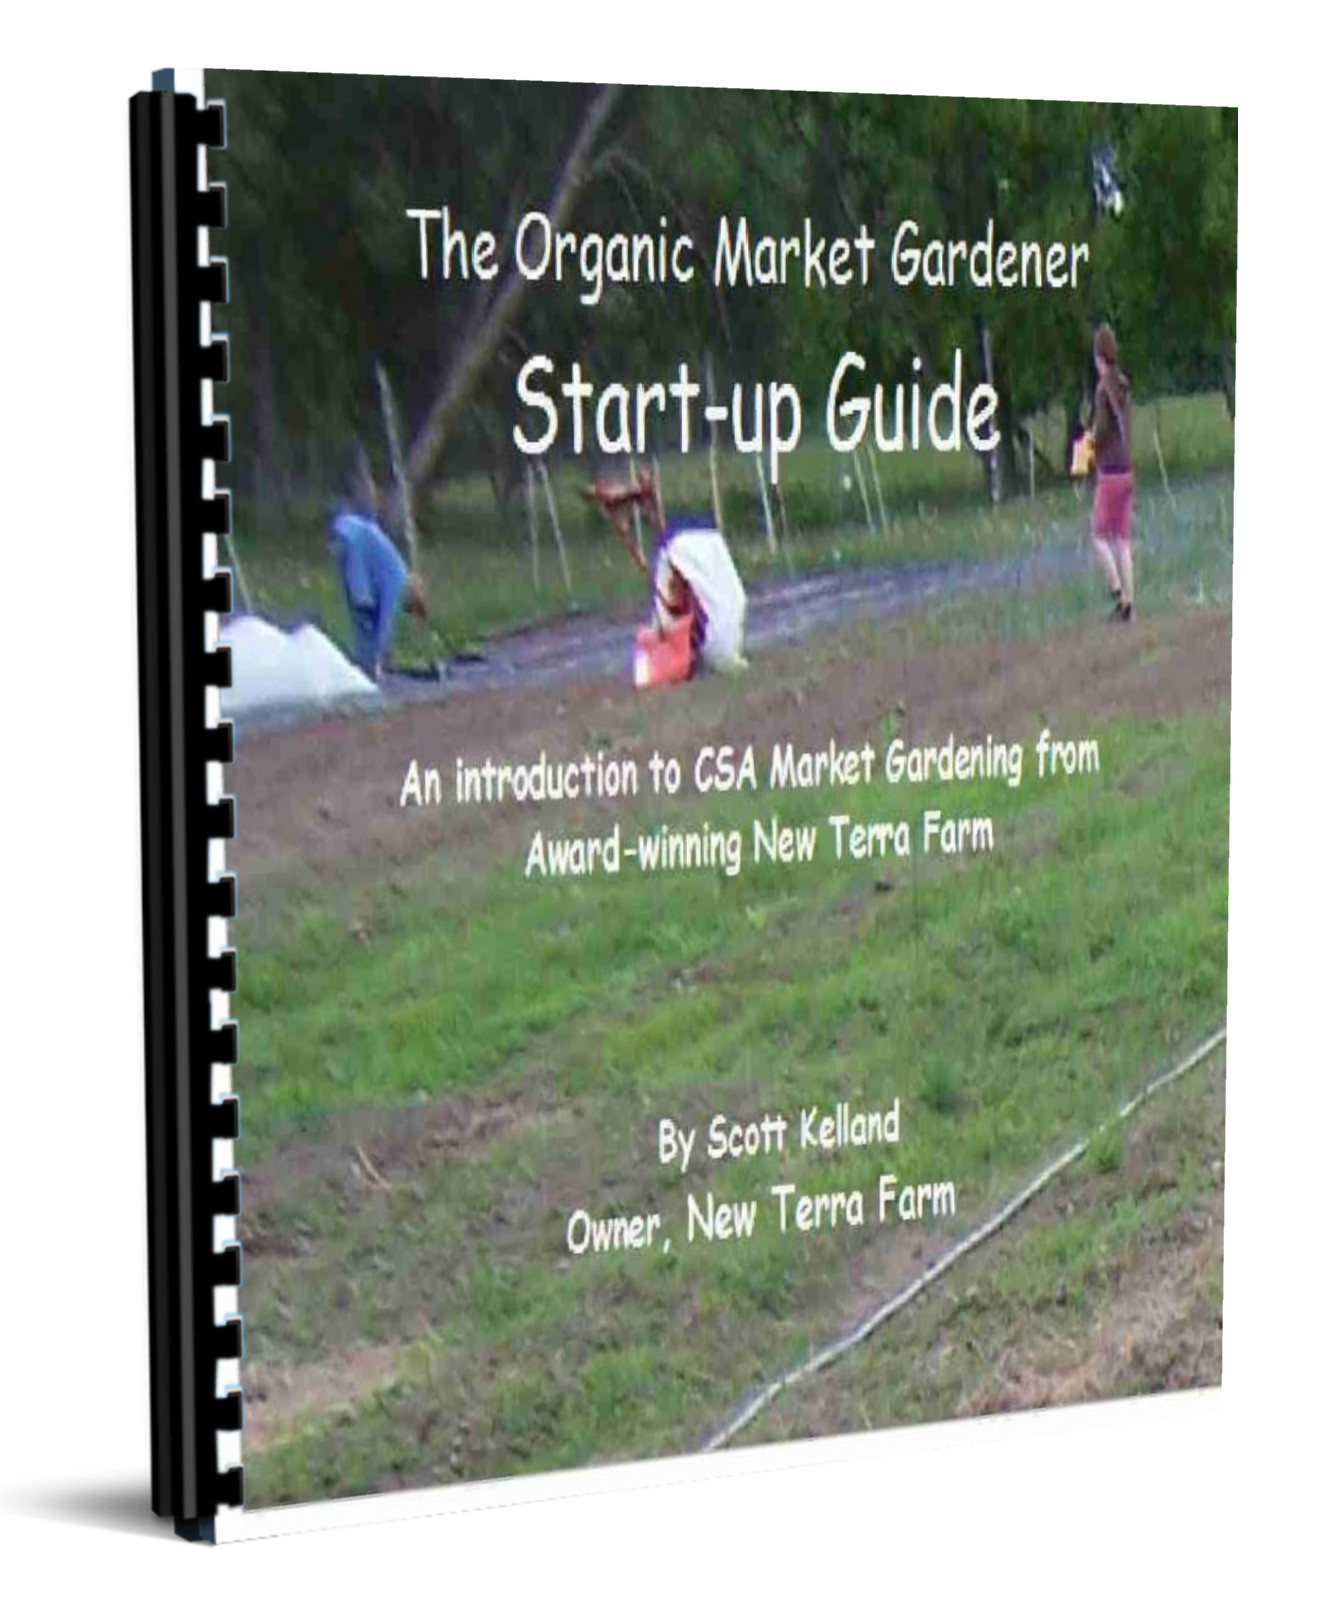 Find out the right way to start market gardening using our award-winning  bootstrap market gardening model